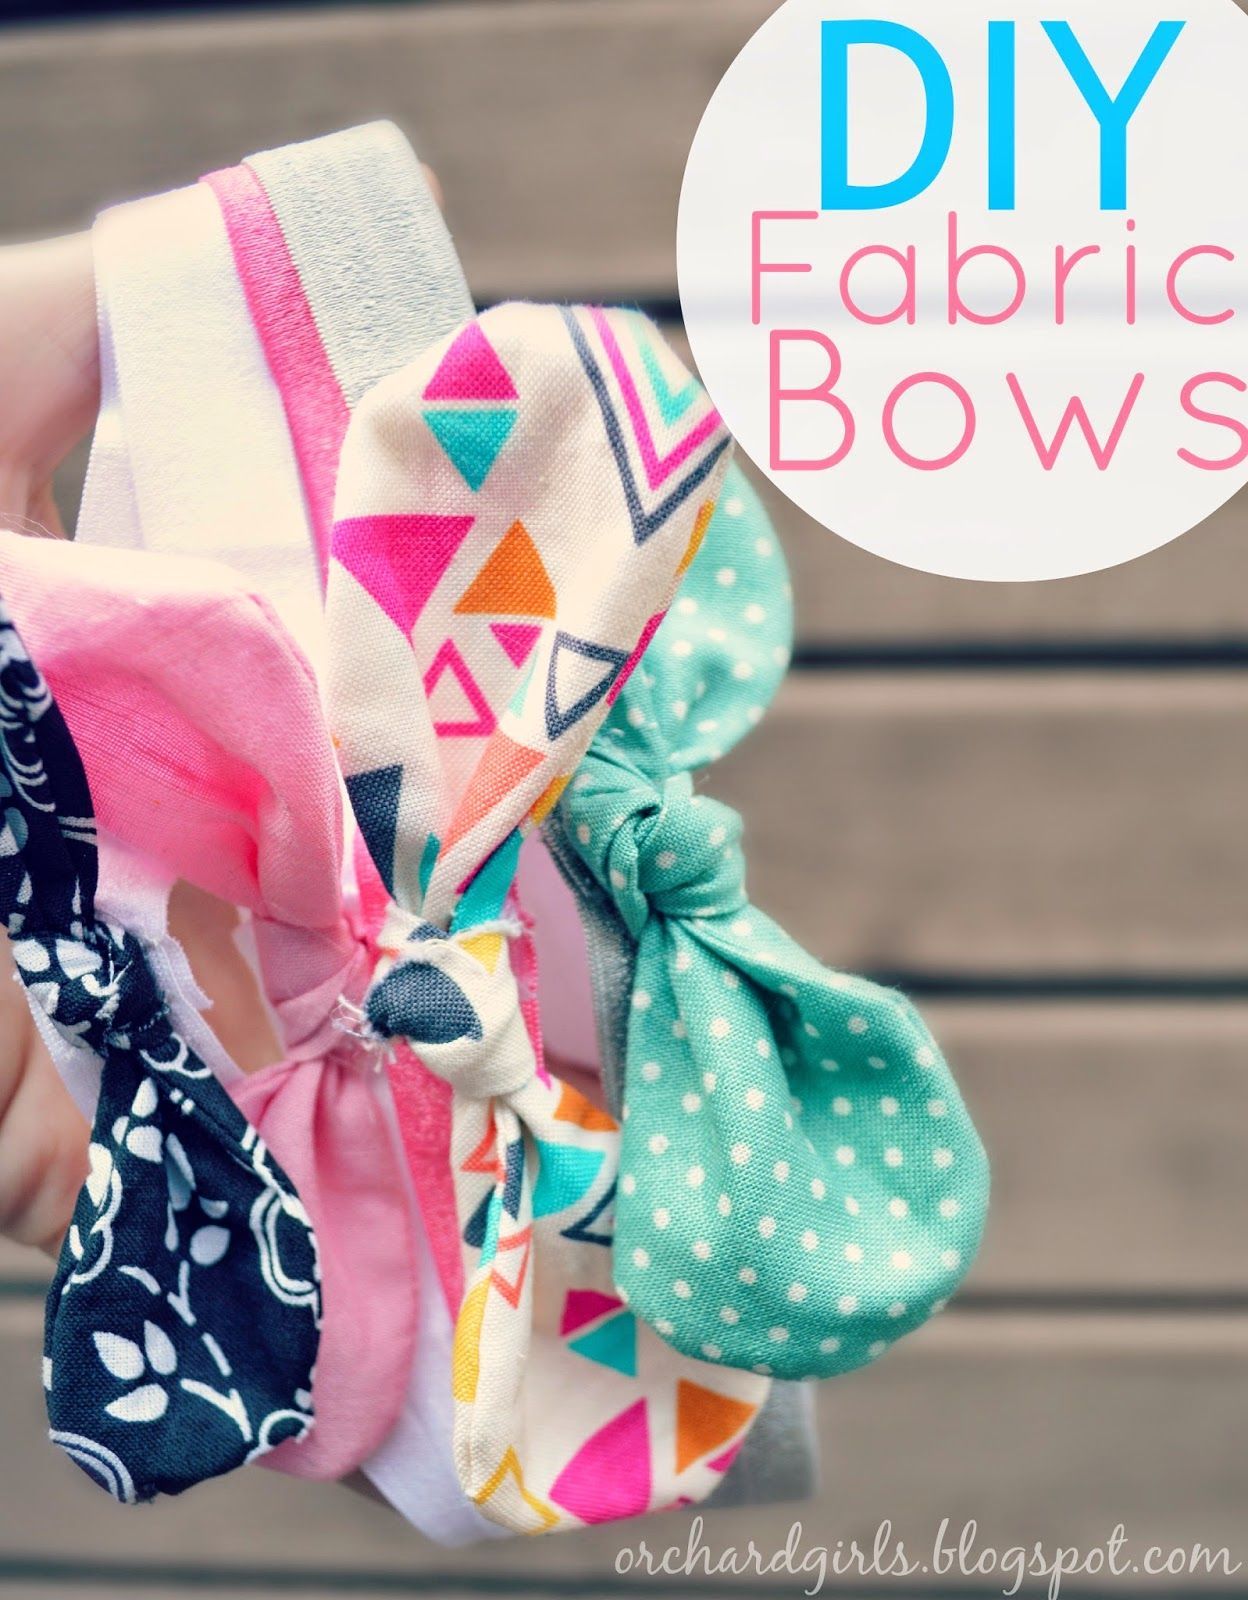 Bows seem so very simple. But there are truly hundreds of ways to make handmade bows and even more crafts that might be inspired by them. Here are lots of new and modern ideas for crafting with bows